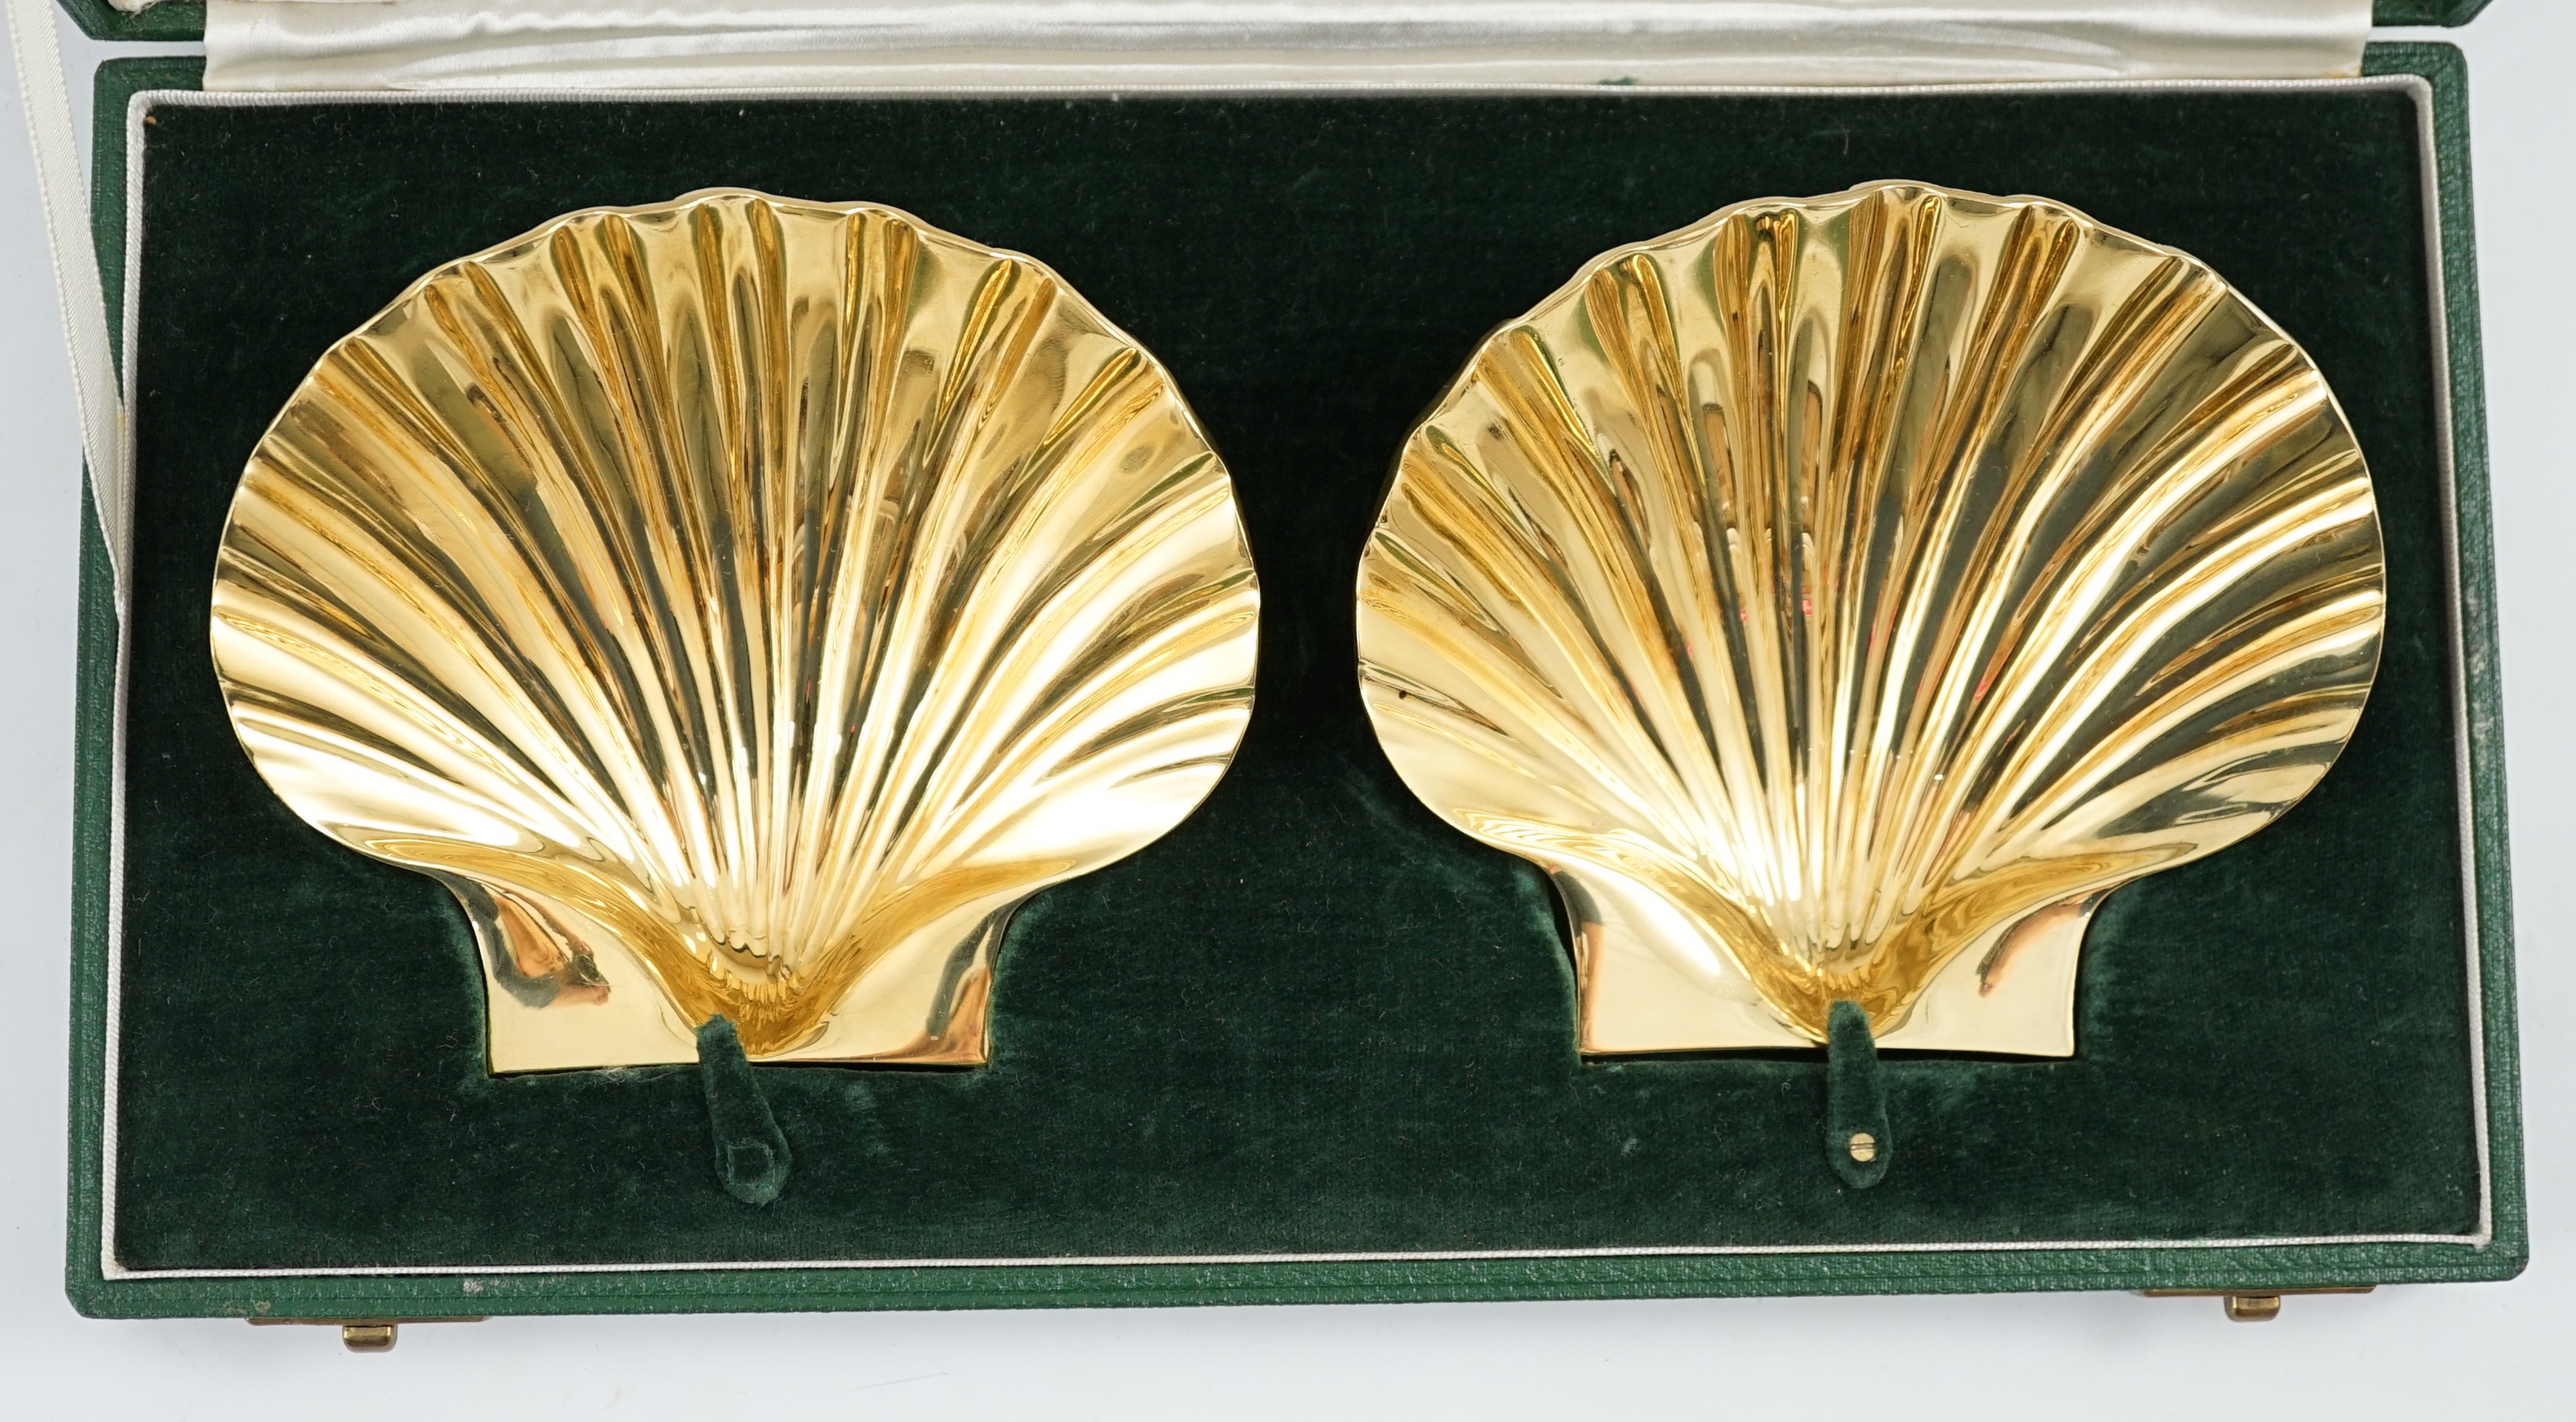 A cased pair of Elizabeth II silver gilt scallop shell butter dishes by Collingwood & Co, on shell - Image 3 of 7